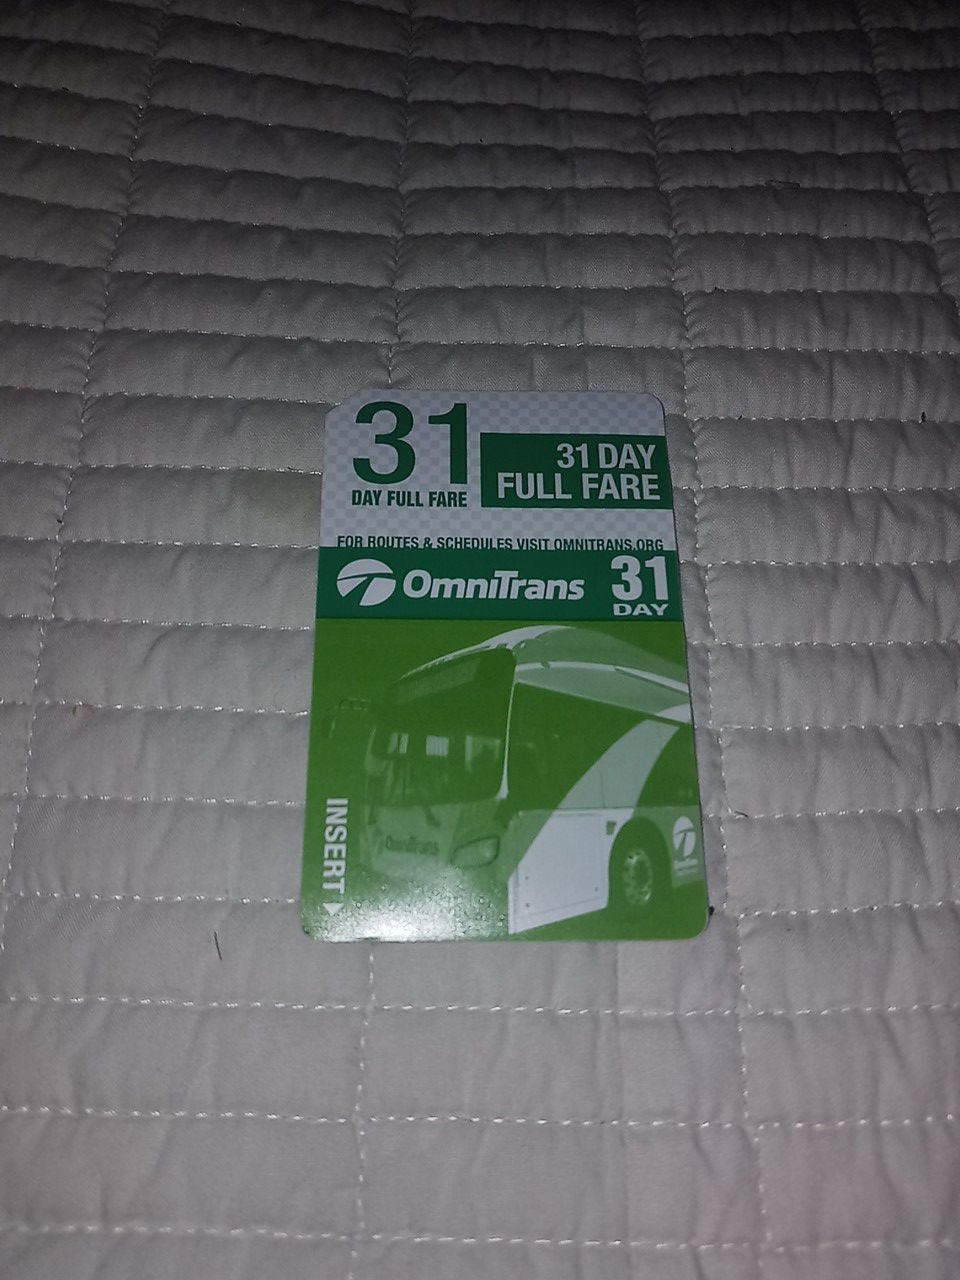 31 day bus pass never used